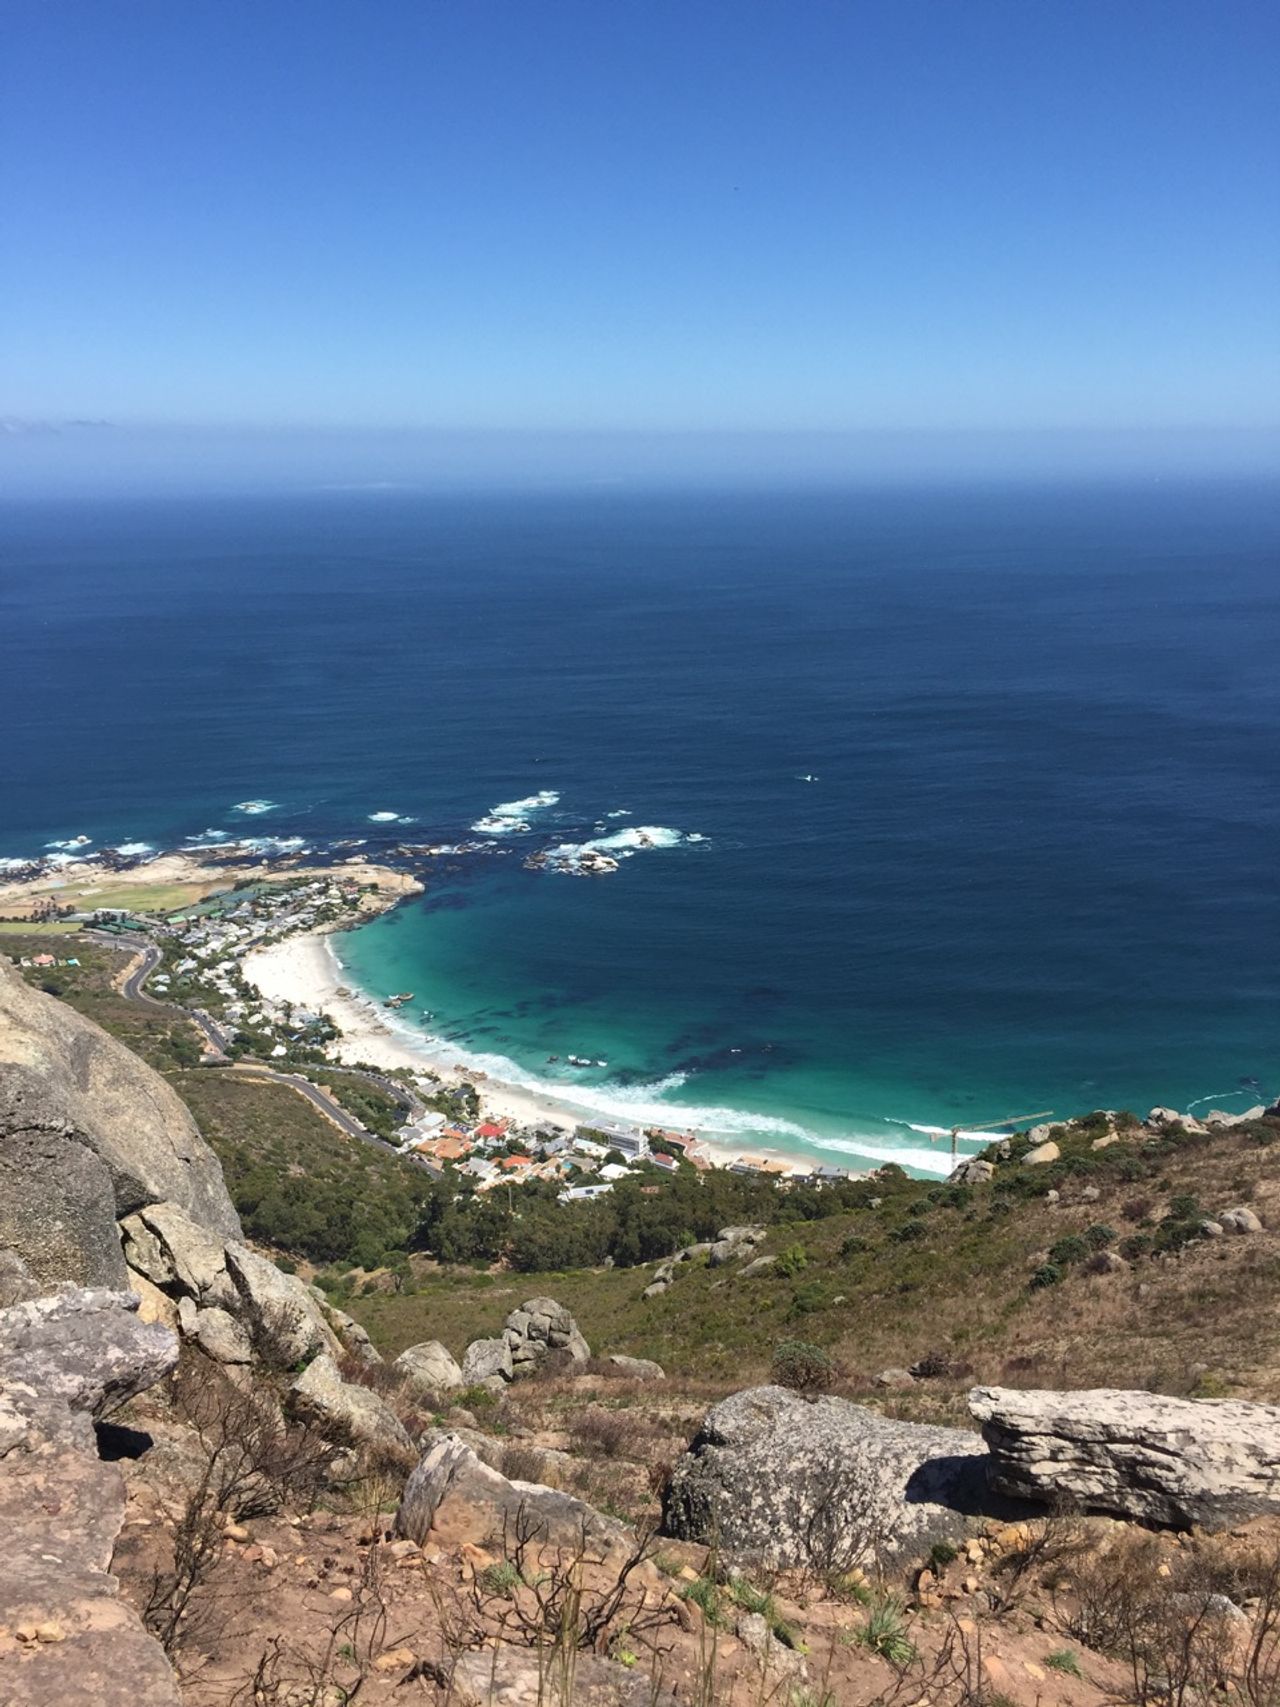 The ocean, viewed from upon a mountain.